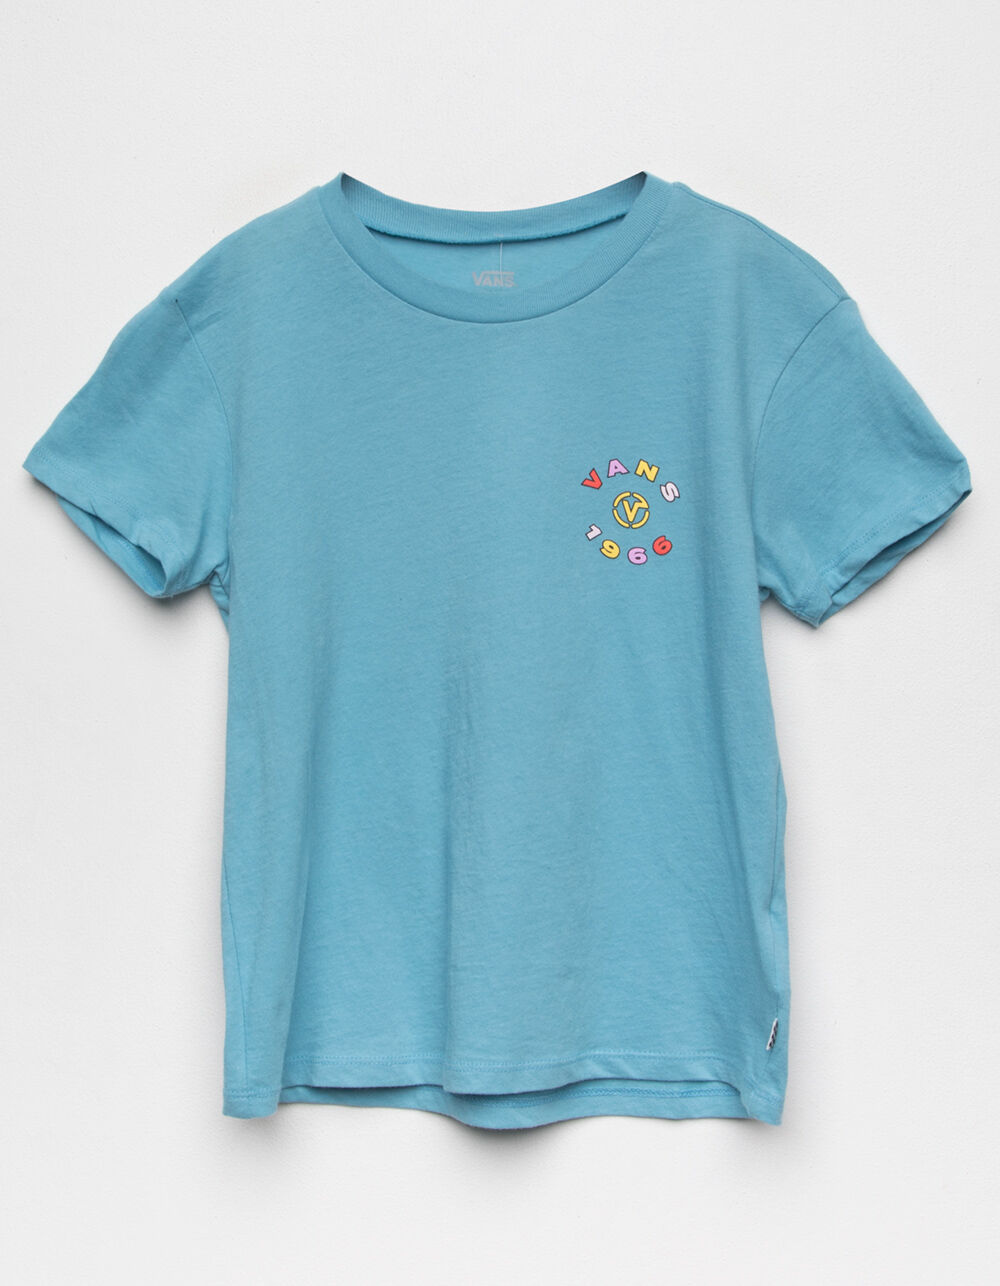 VANS Round Out Girls Tee - TURQUOISE | Tillys